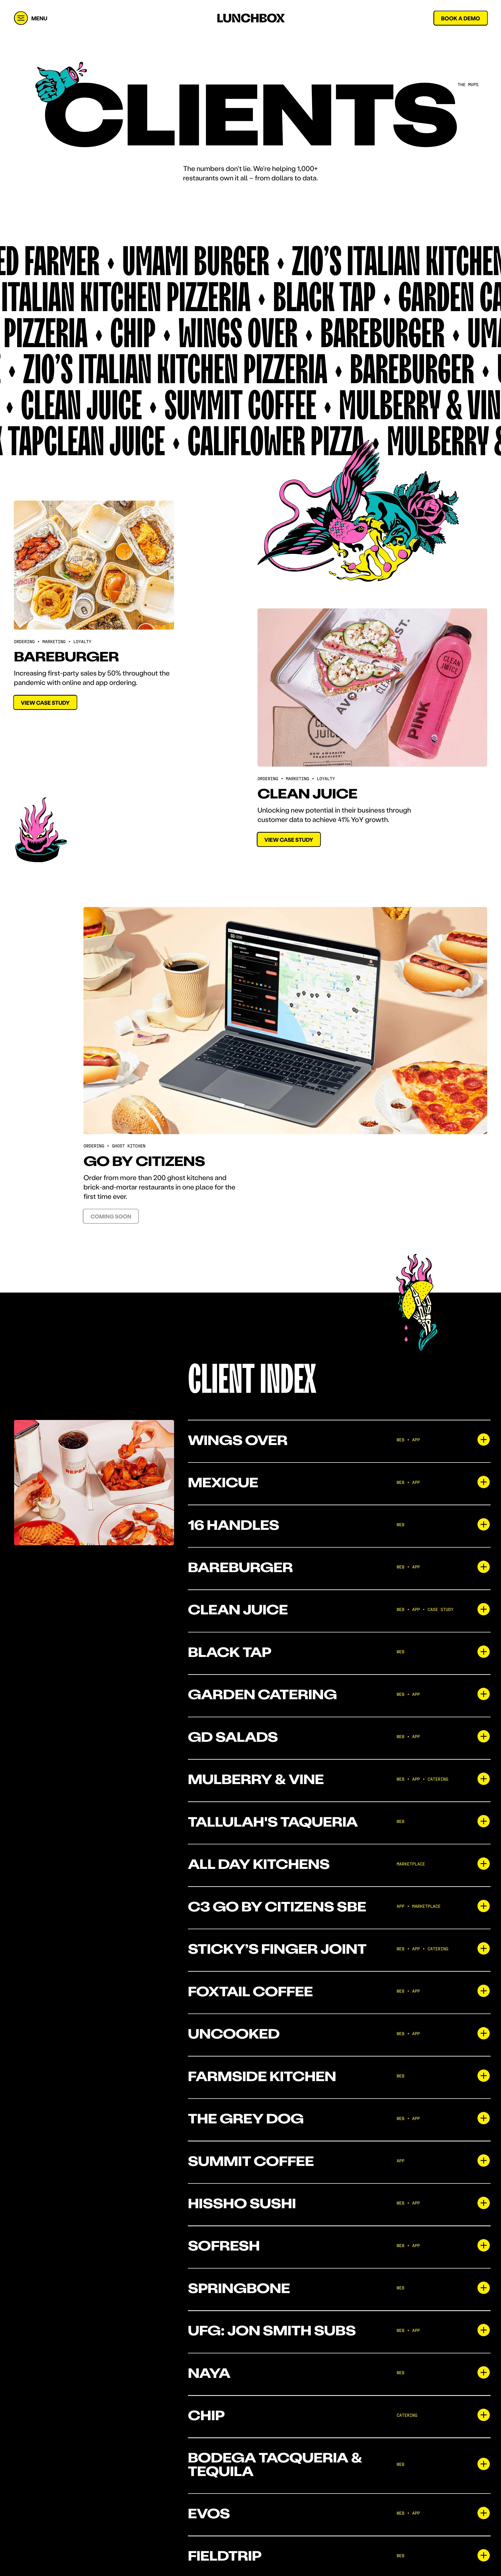 Lunchbox Landing Page Example: We're a collection of modern and creative online ordering solutions for enterprise restaurant chains and ghost kitchens.